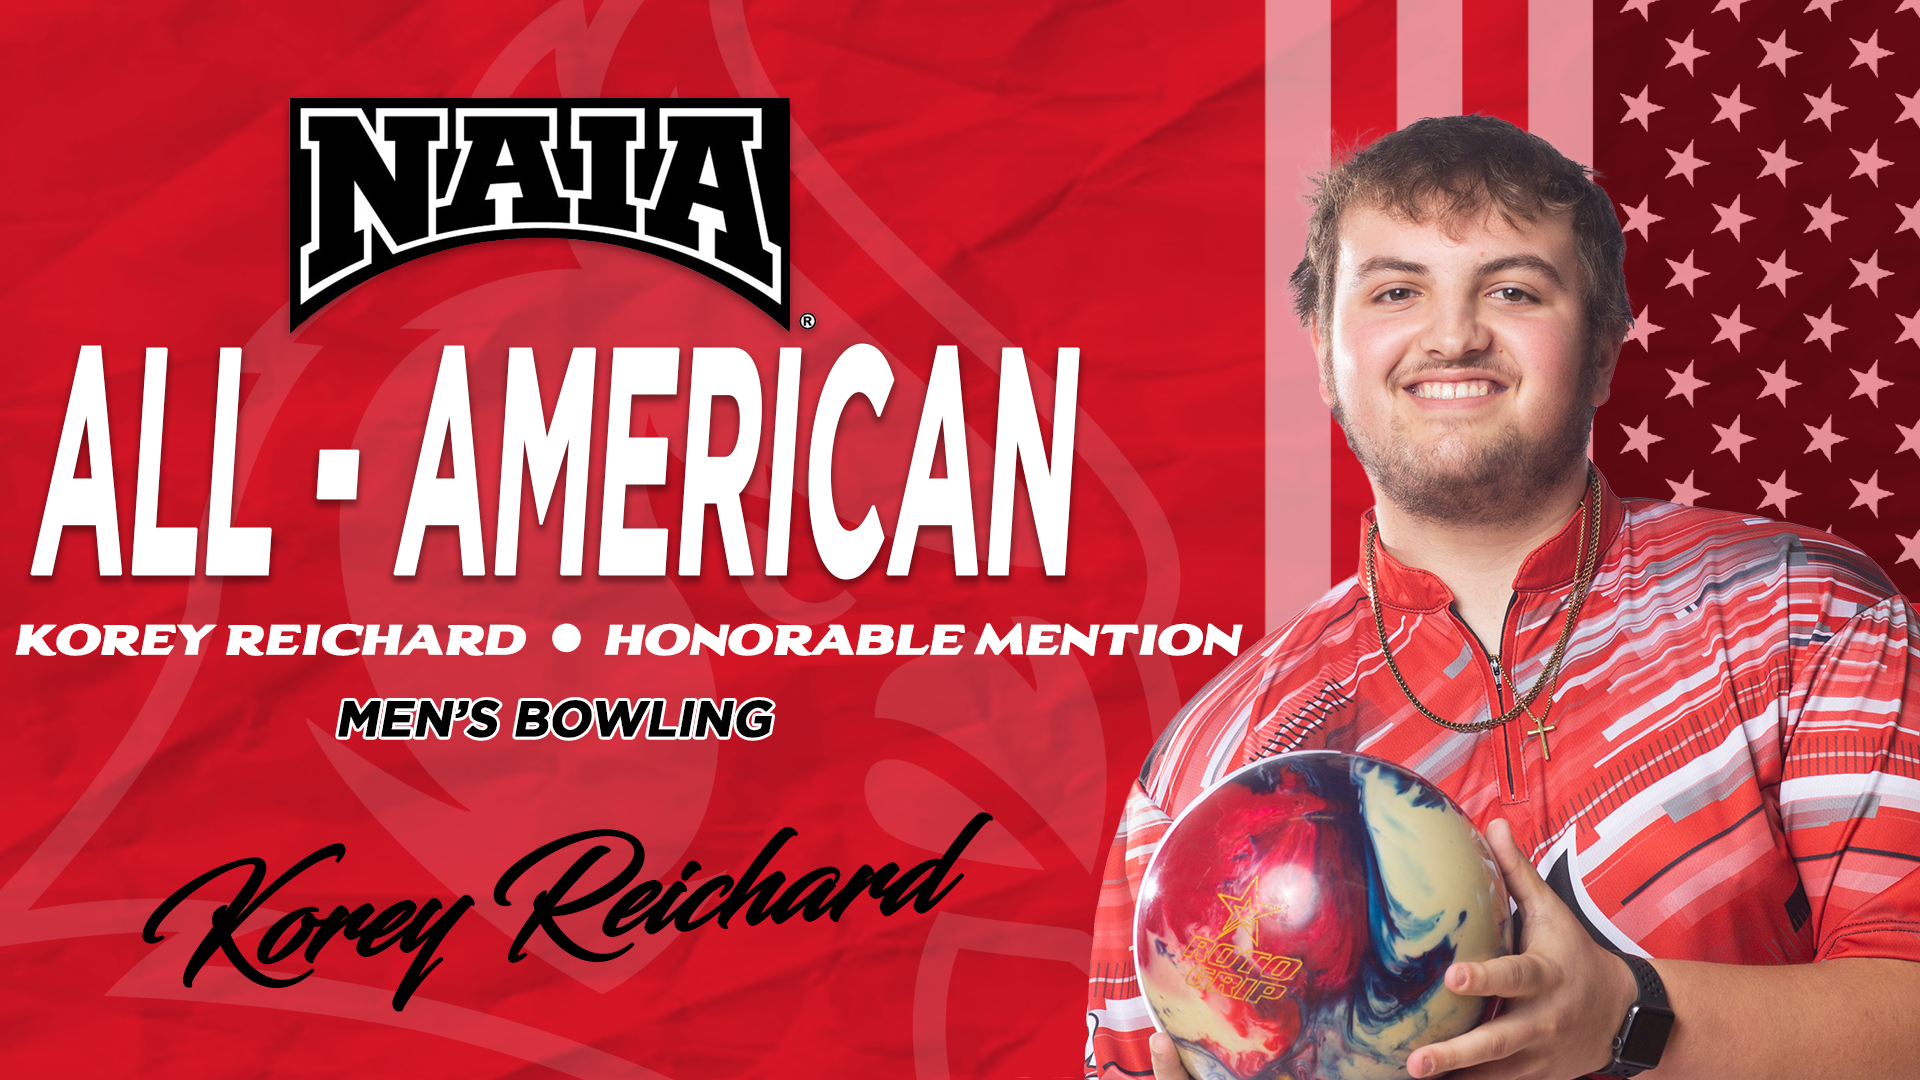 Reichard named to the NAIA All-American Honorable Mention list